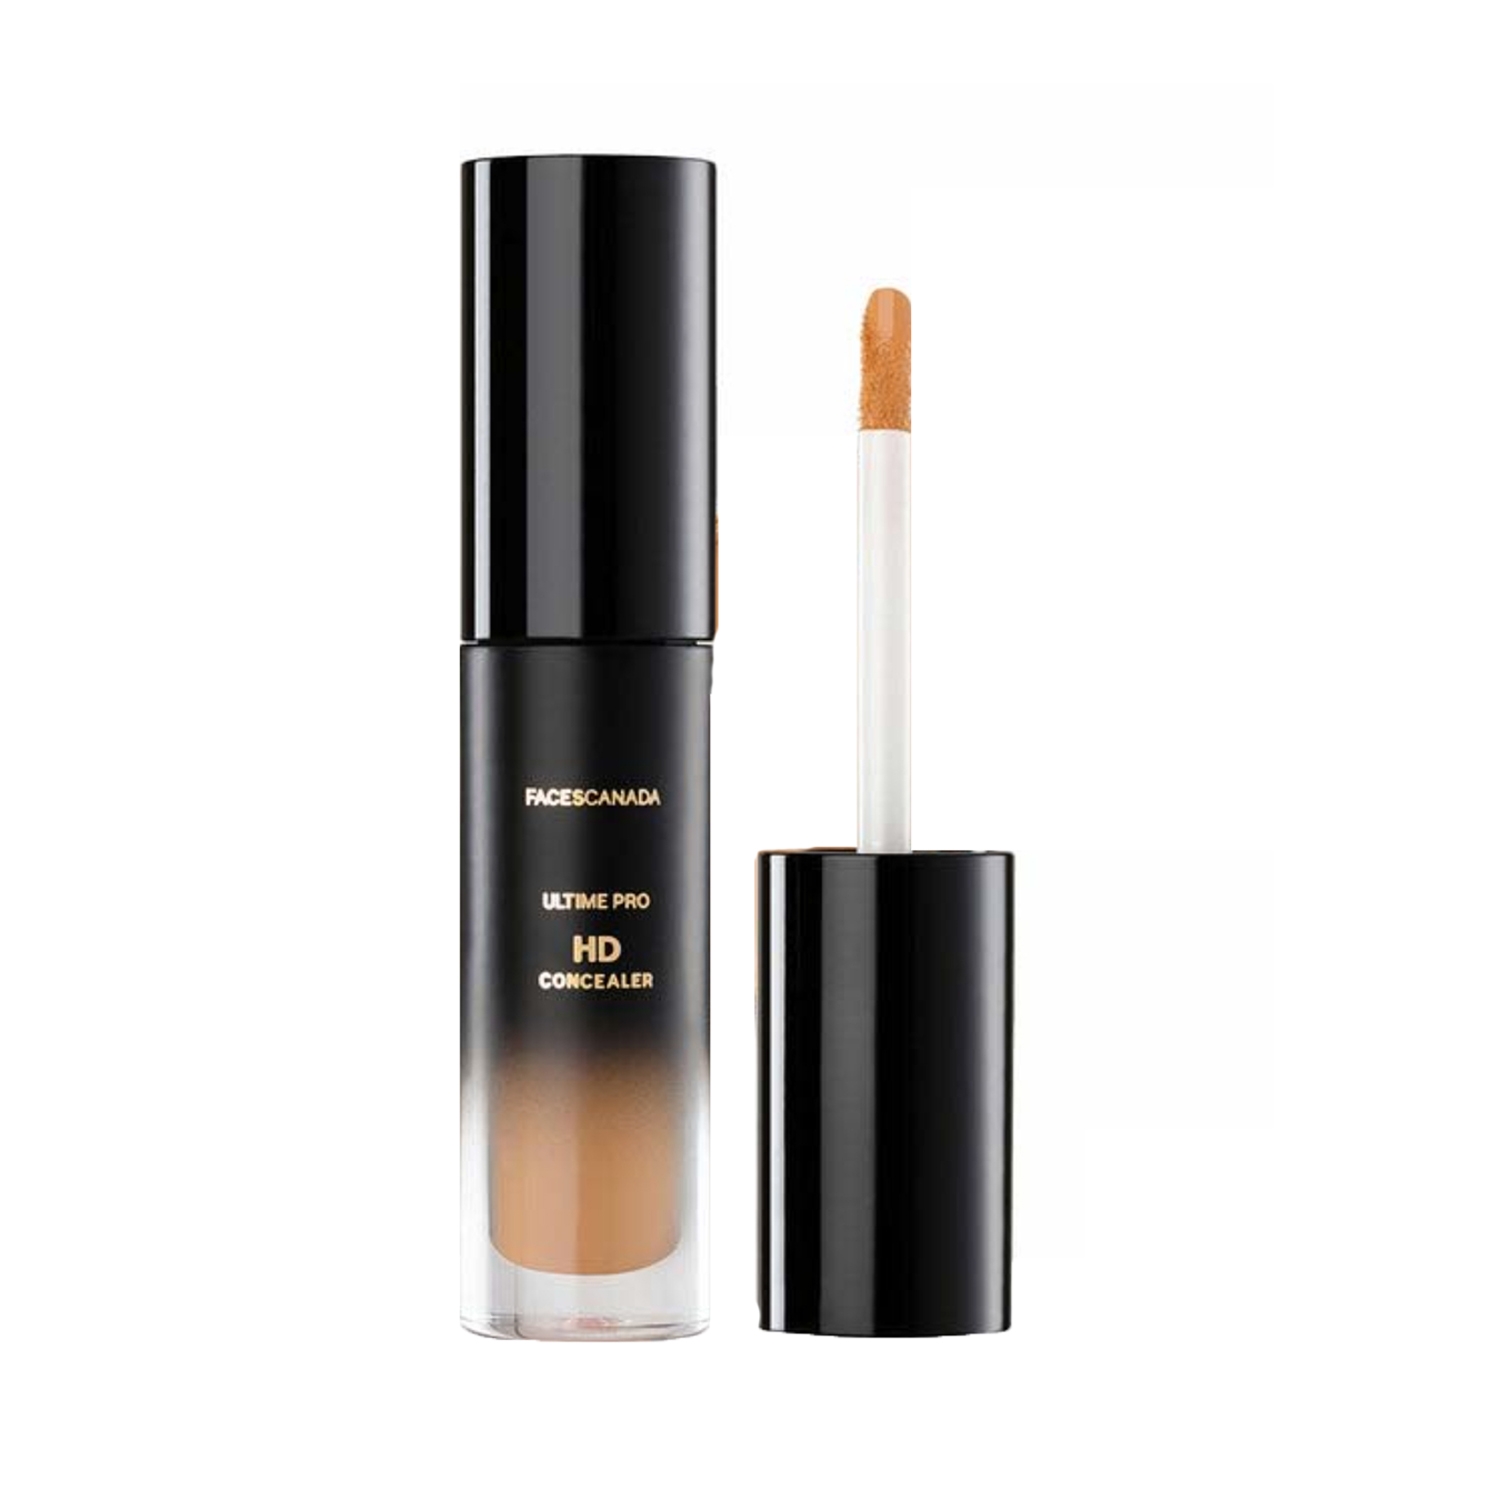 Faces Canada | Faces Canada Ultime Pro HD Concealer - 04 Toffee Love (3.8ml)